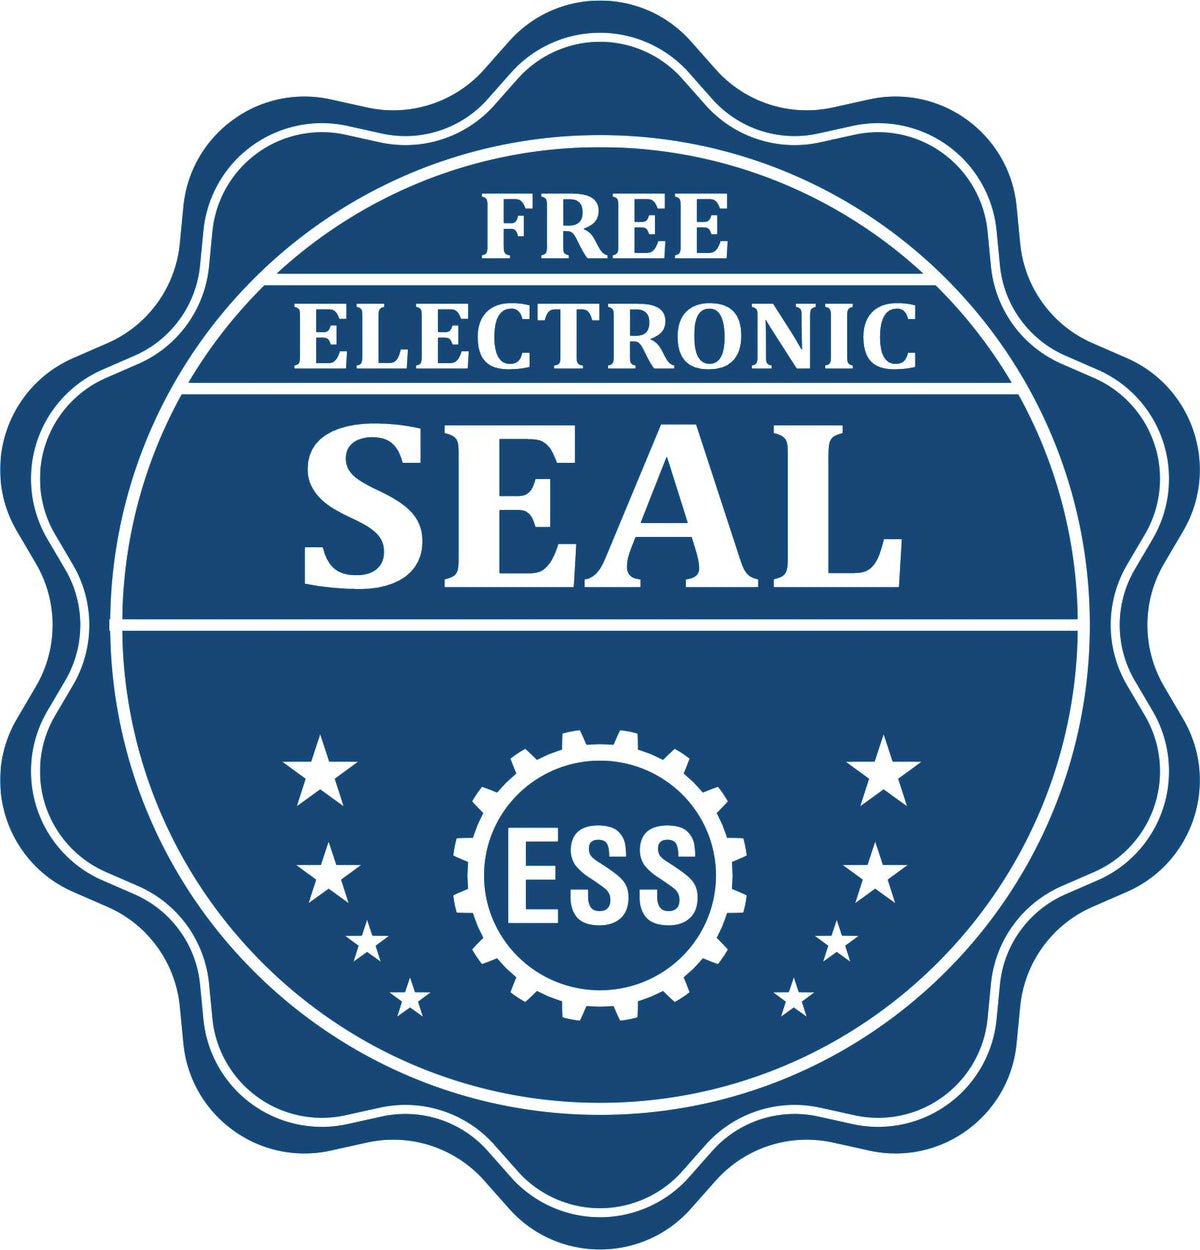 A badge showing a free electronic seal for the Super Slim Colorado Notary Public Stamp with stars and the ESS gear on the emblem.